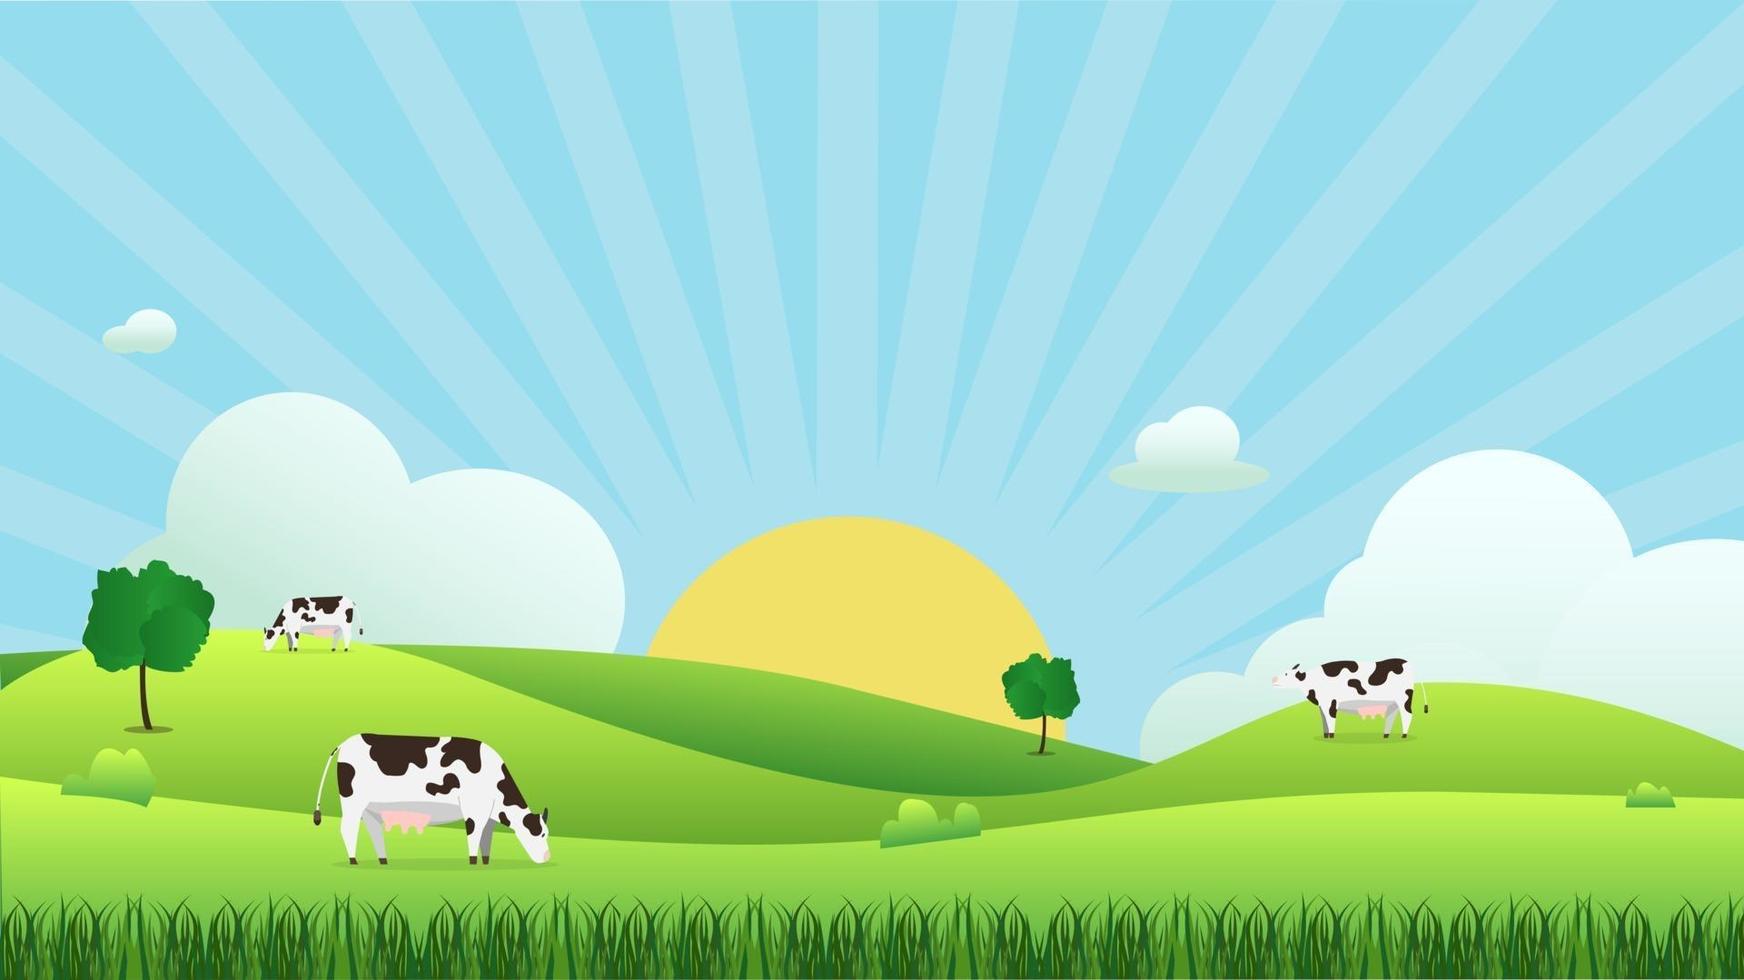 Meadow landscape with cow eating grass, vector illustration.Green field and sky blue and sun shine with white cloud background.Beautiful nature scene with sunrise.Cow with natural scene.